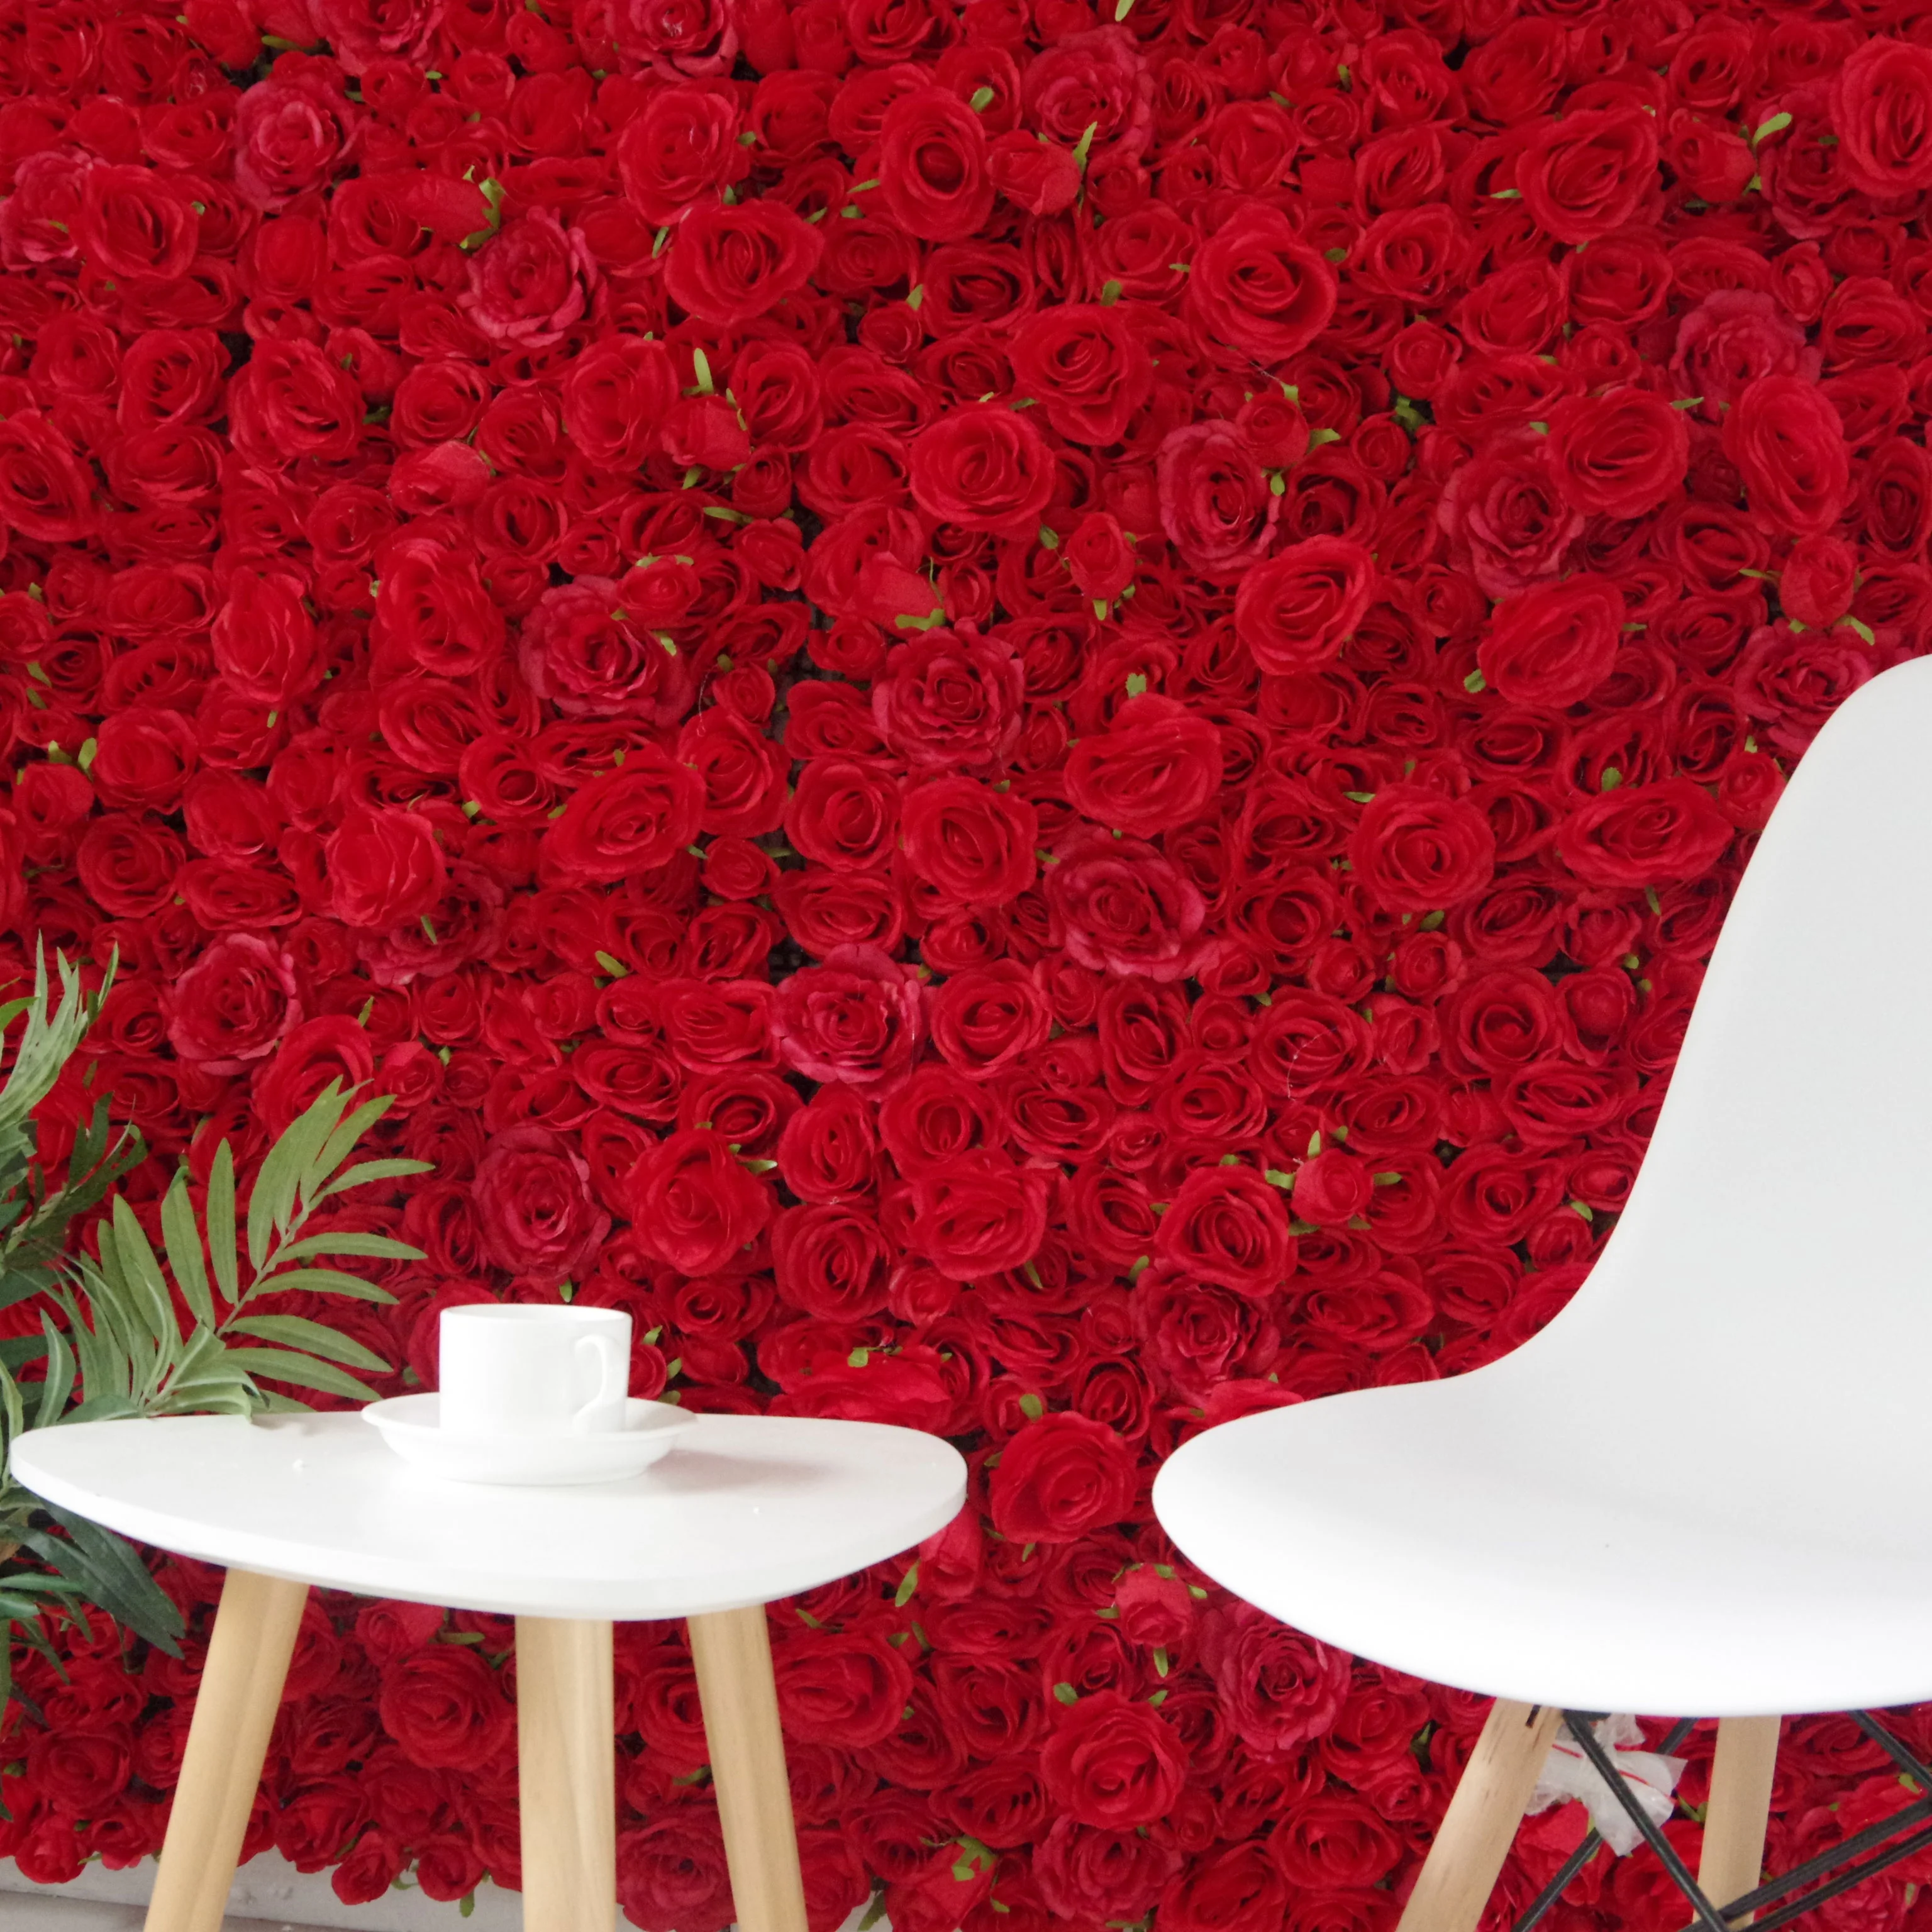 

2022 new product wedding backdrop red rose artificial flower wall panels